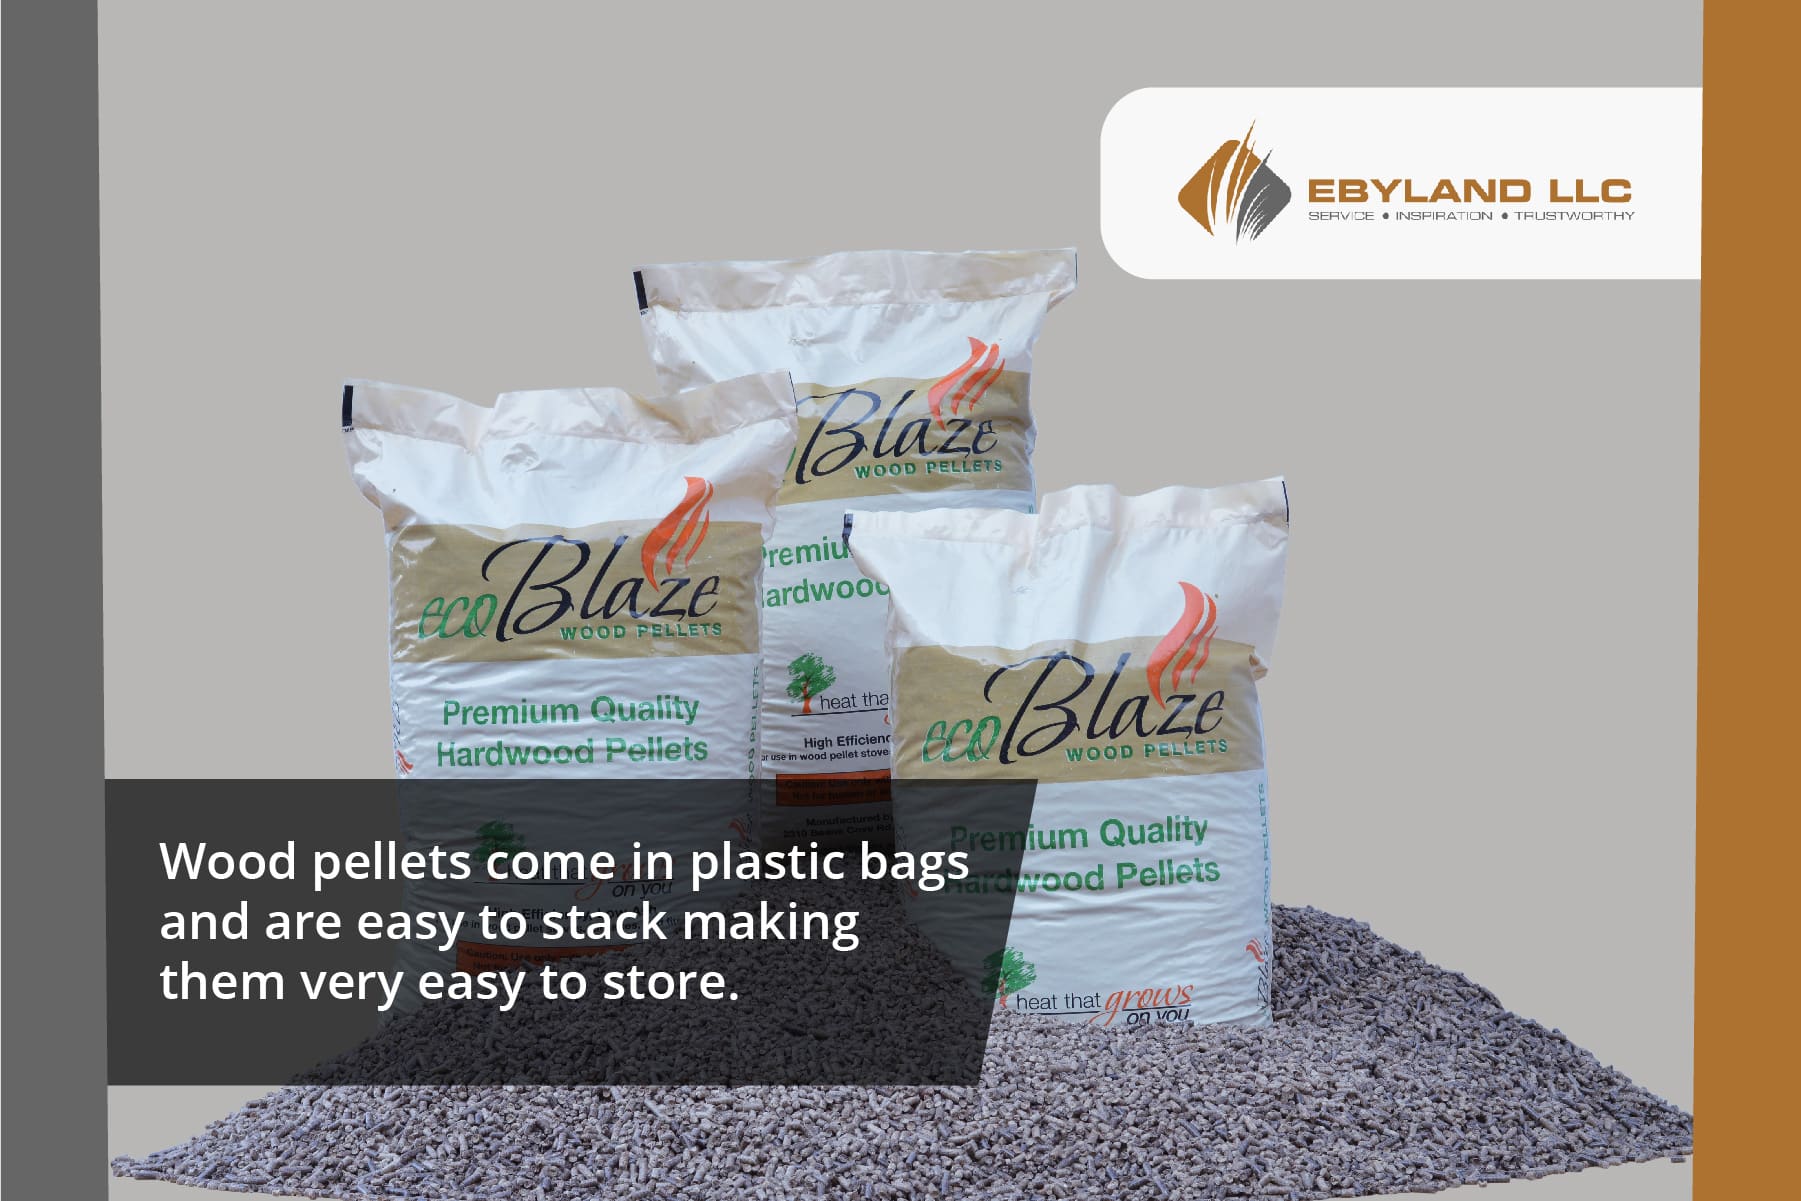 wood pellets come in plastic bags that are easy to stack and store